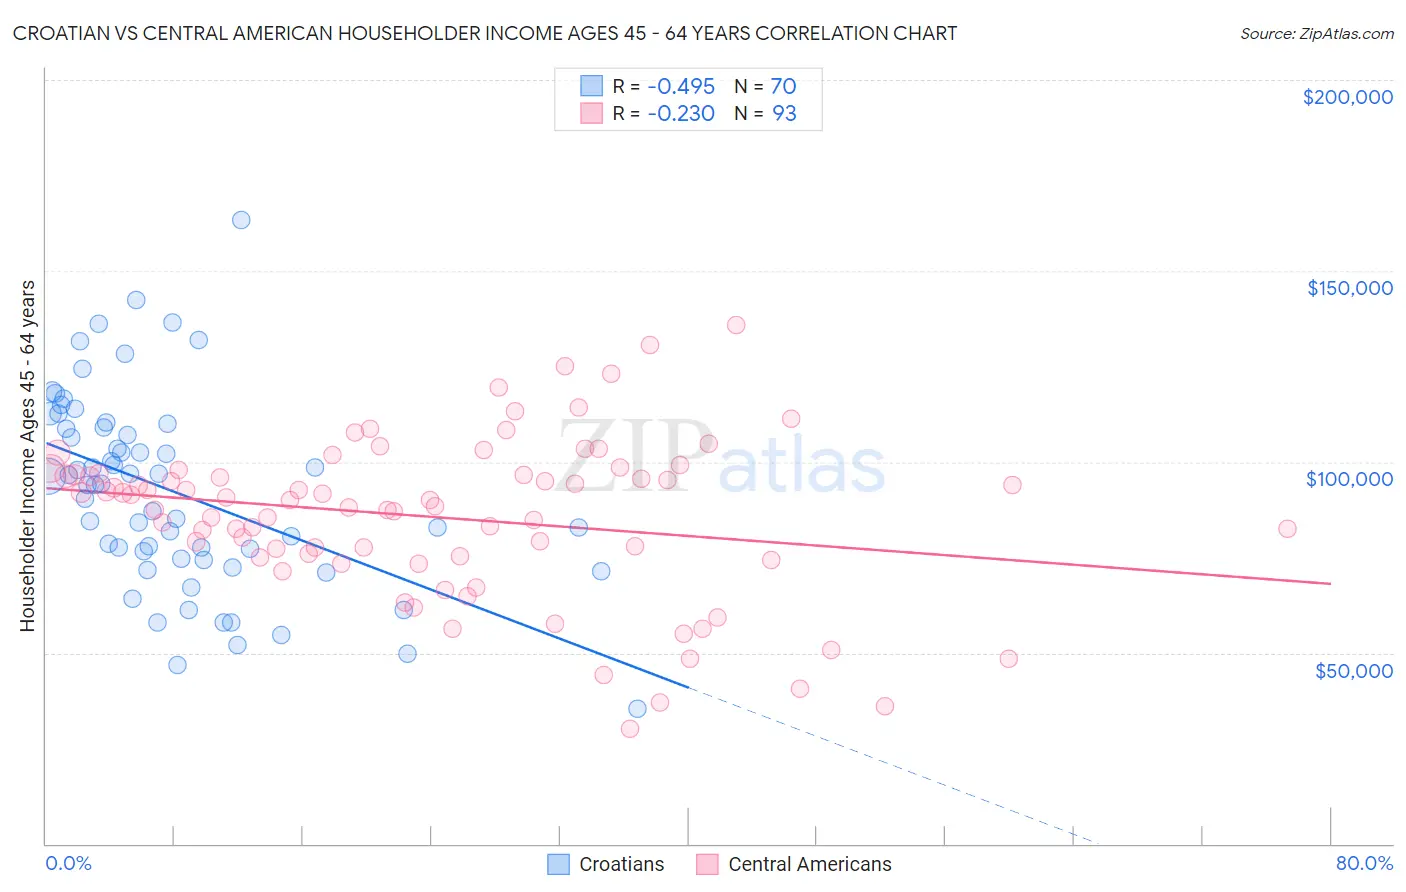 Croatian vs Central American Householder Income Ages 45 - 64 years